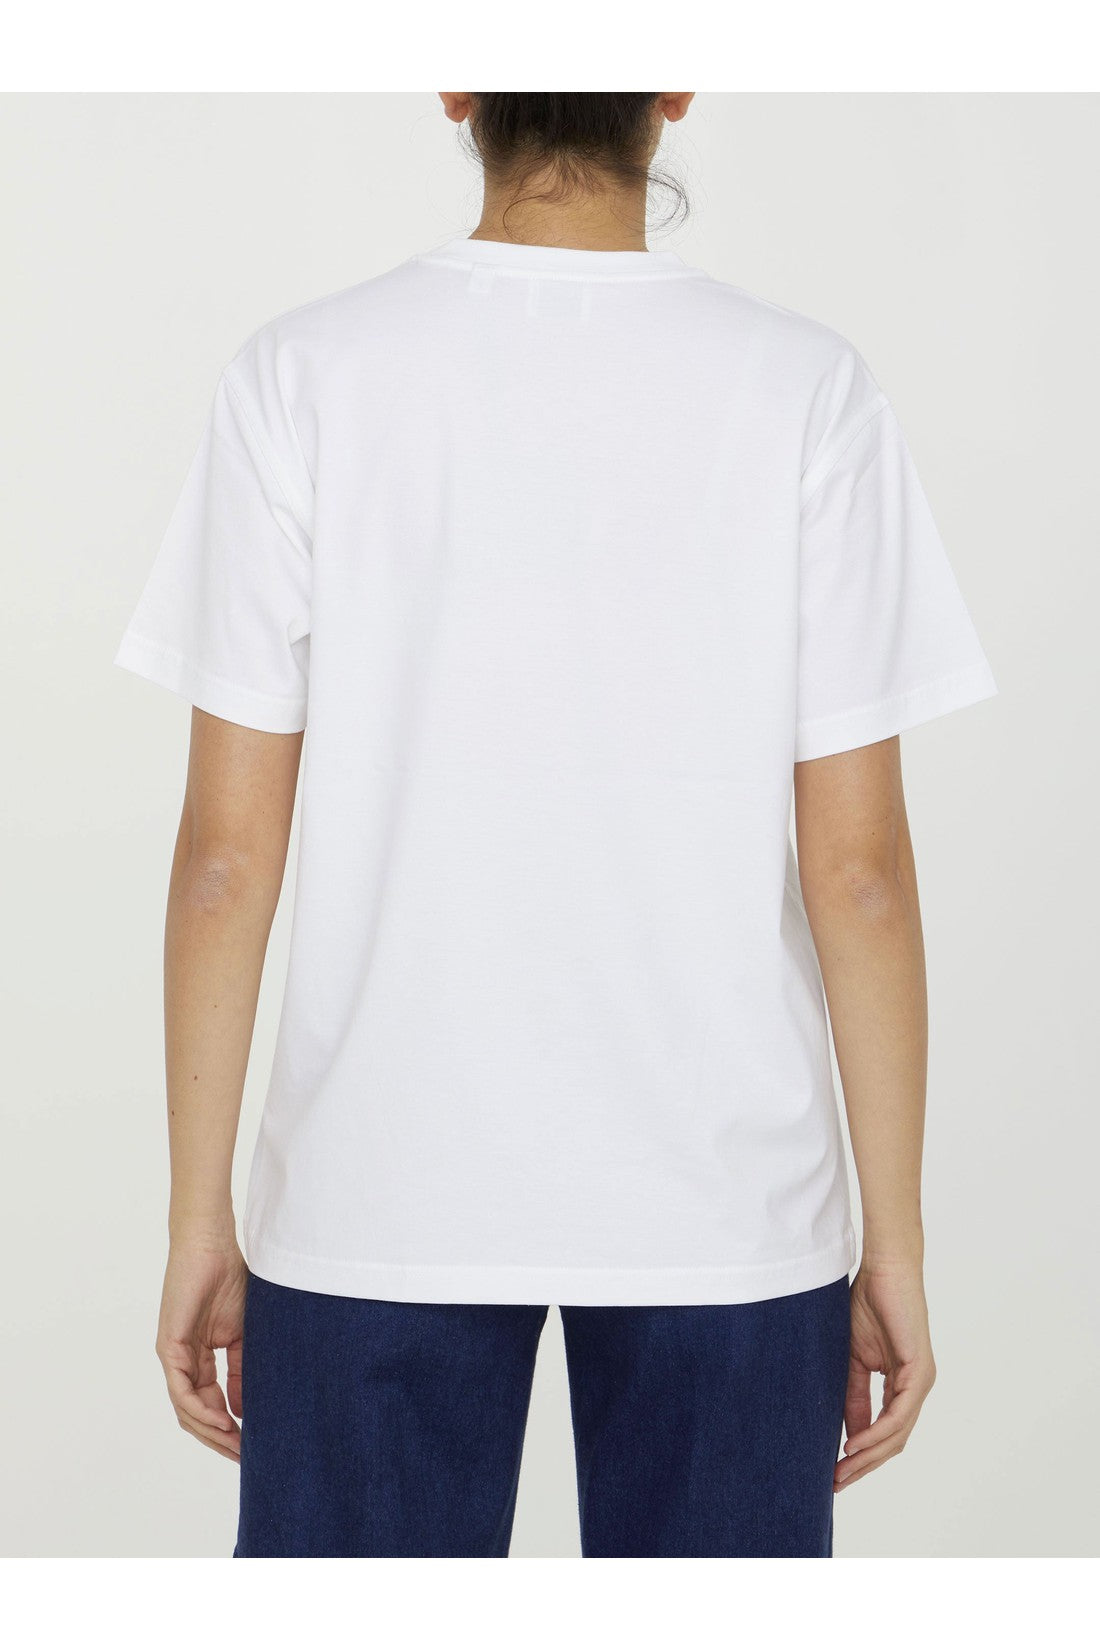 T-shirt with Check pocket